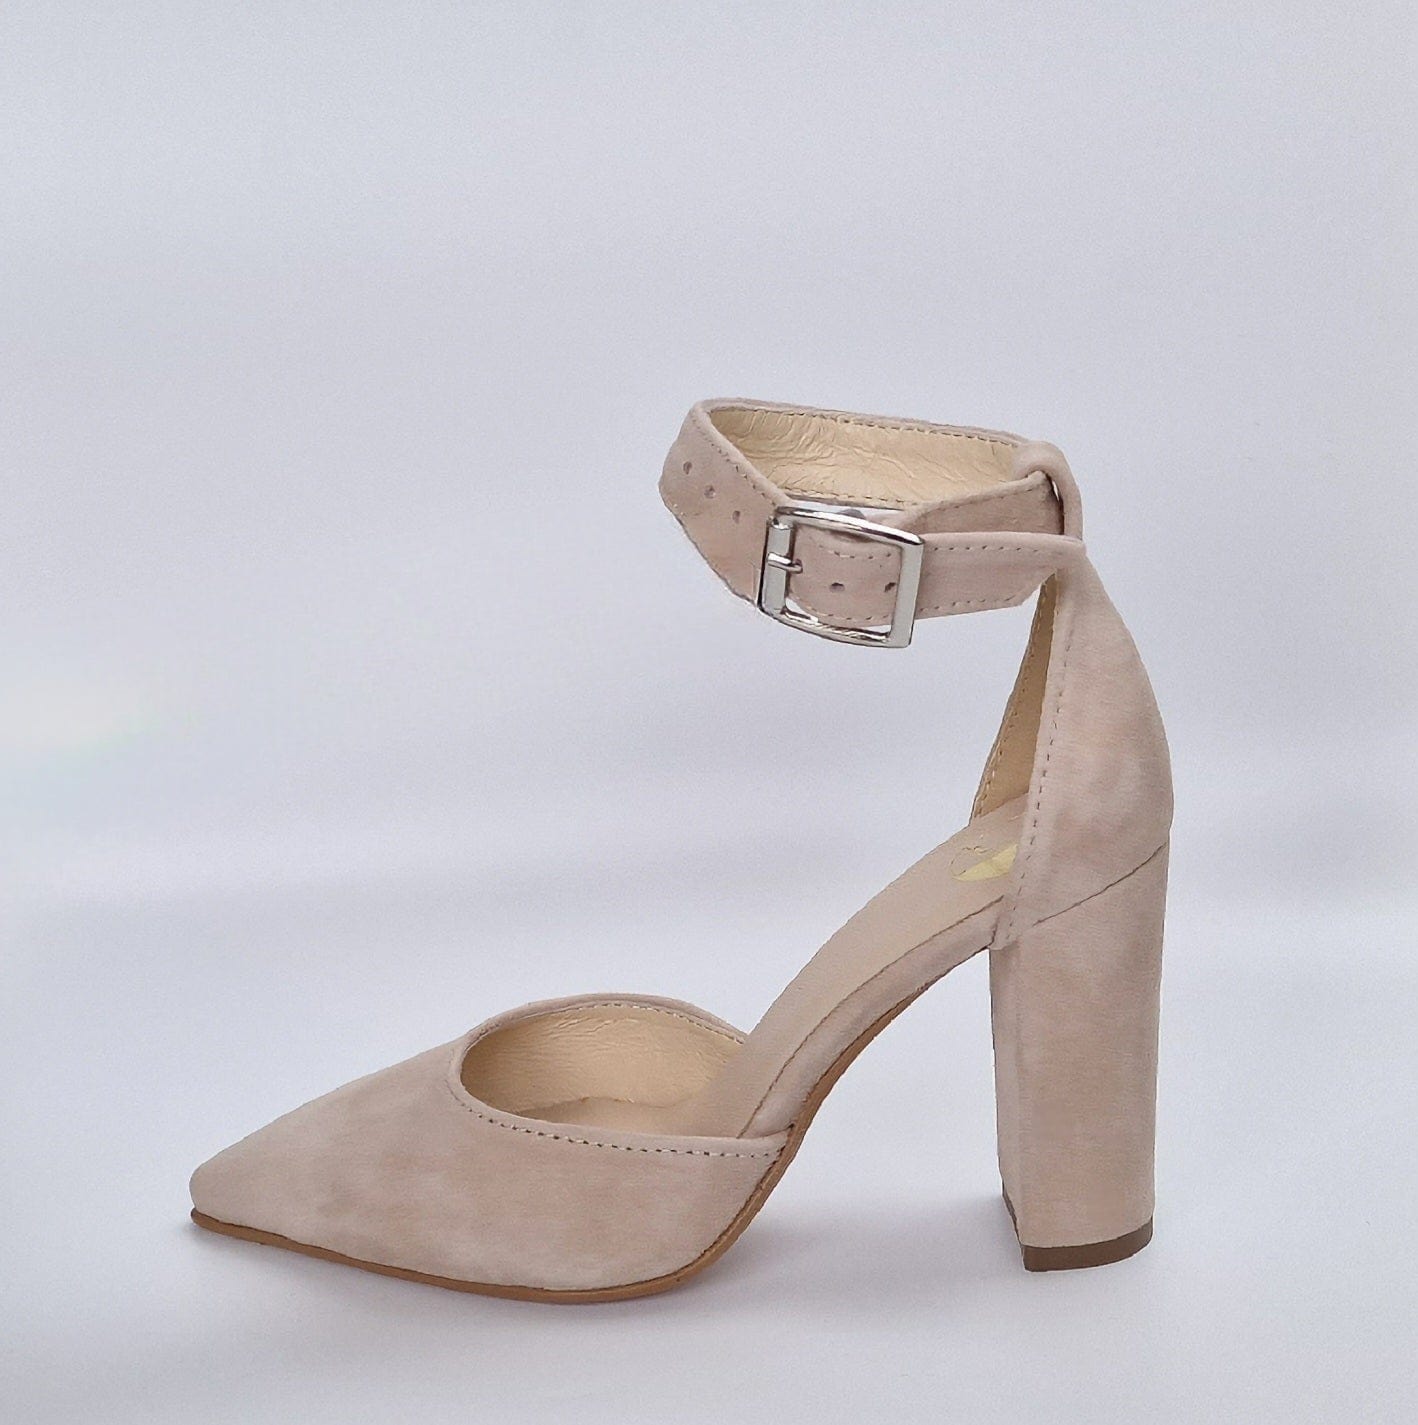 Nude suede block heel court shoes with ankle strap